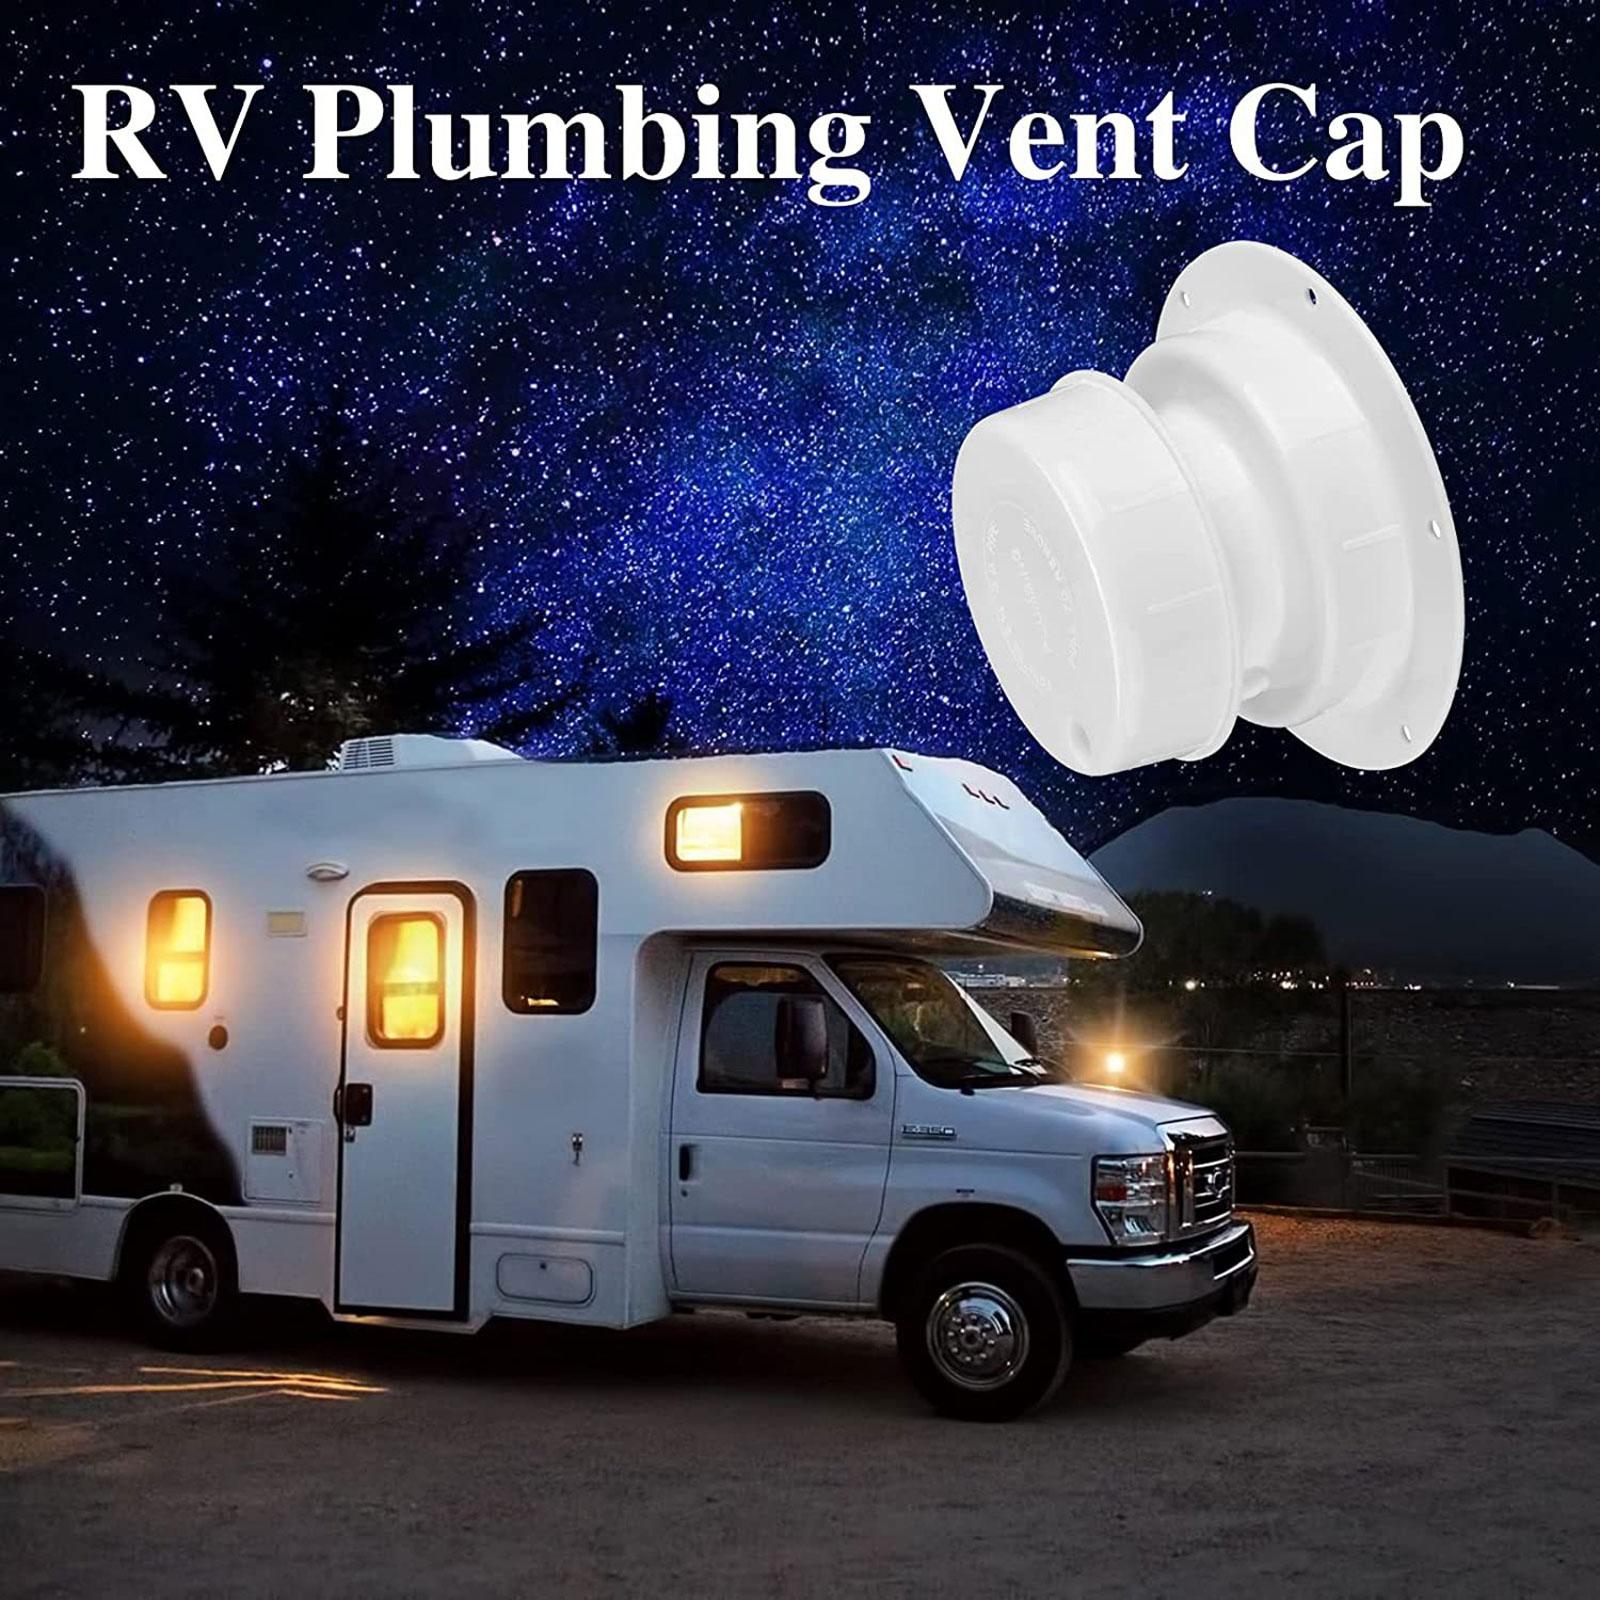 RV Plumbing Vent Cap RV Roof Sewer Vent Cover for Motorhome Trailers RV 1pc